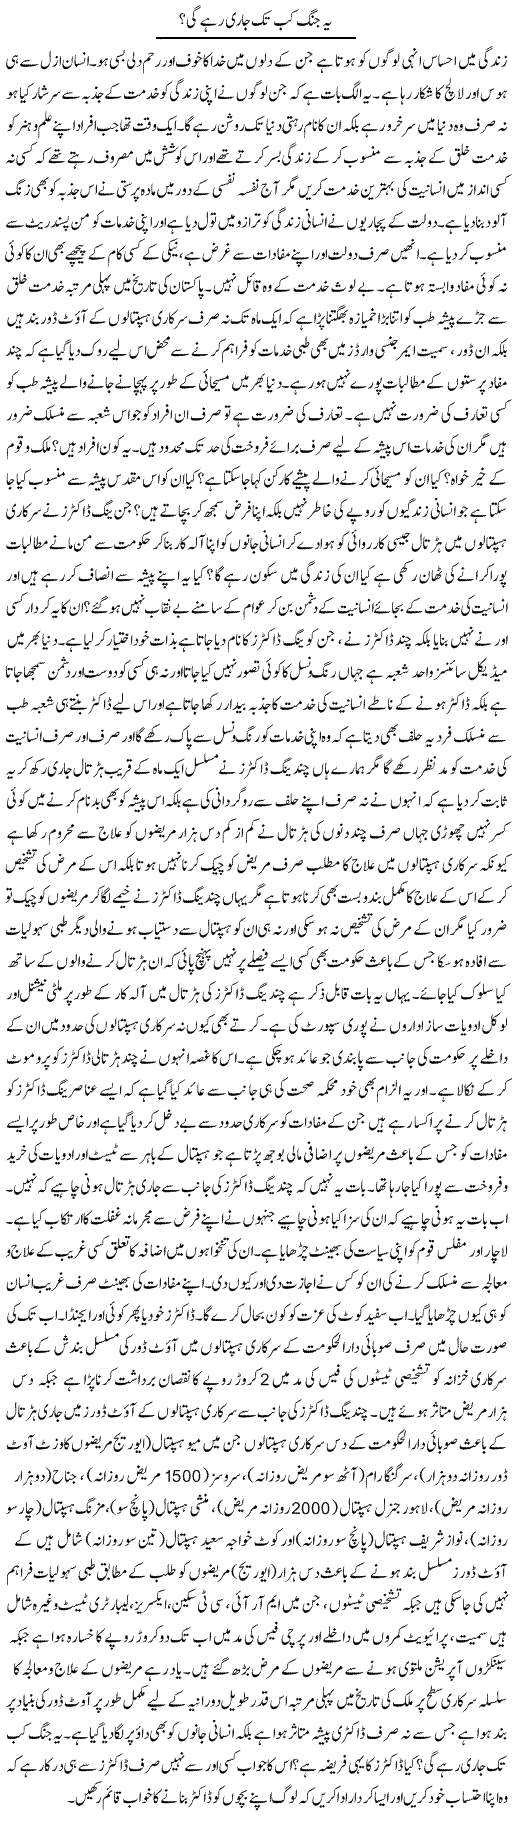 This War Will End Express Column Yousaf Abbasi 26 March 2011